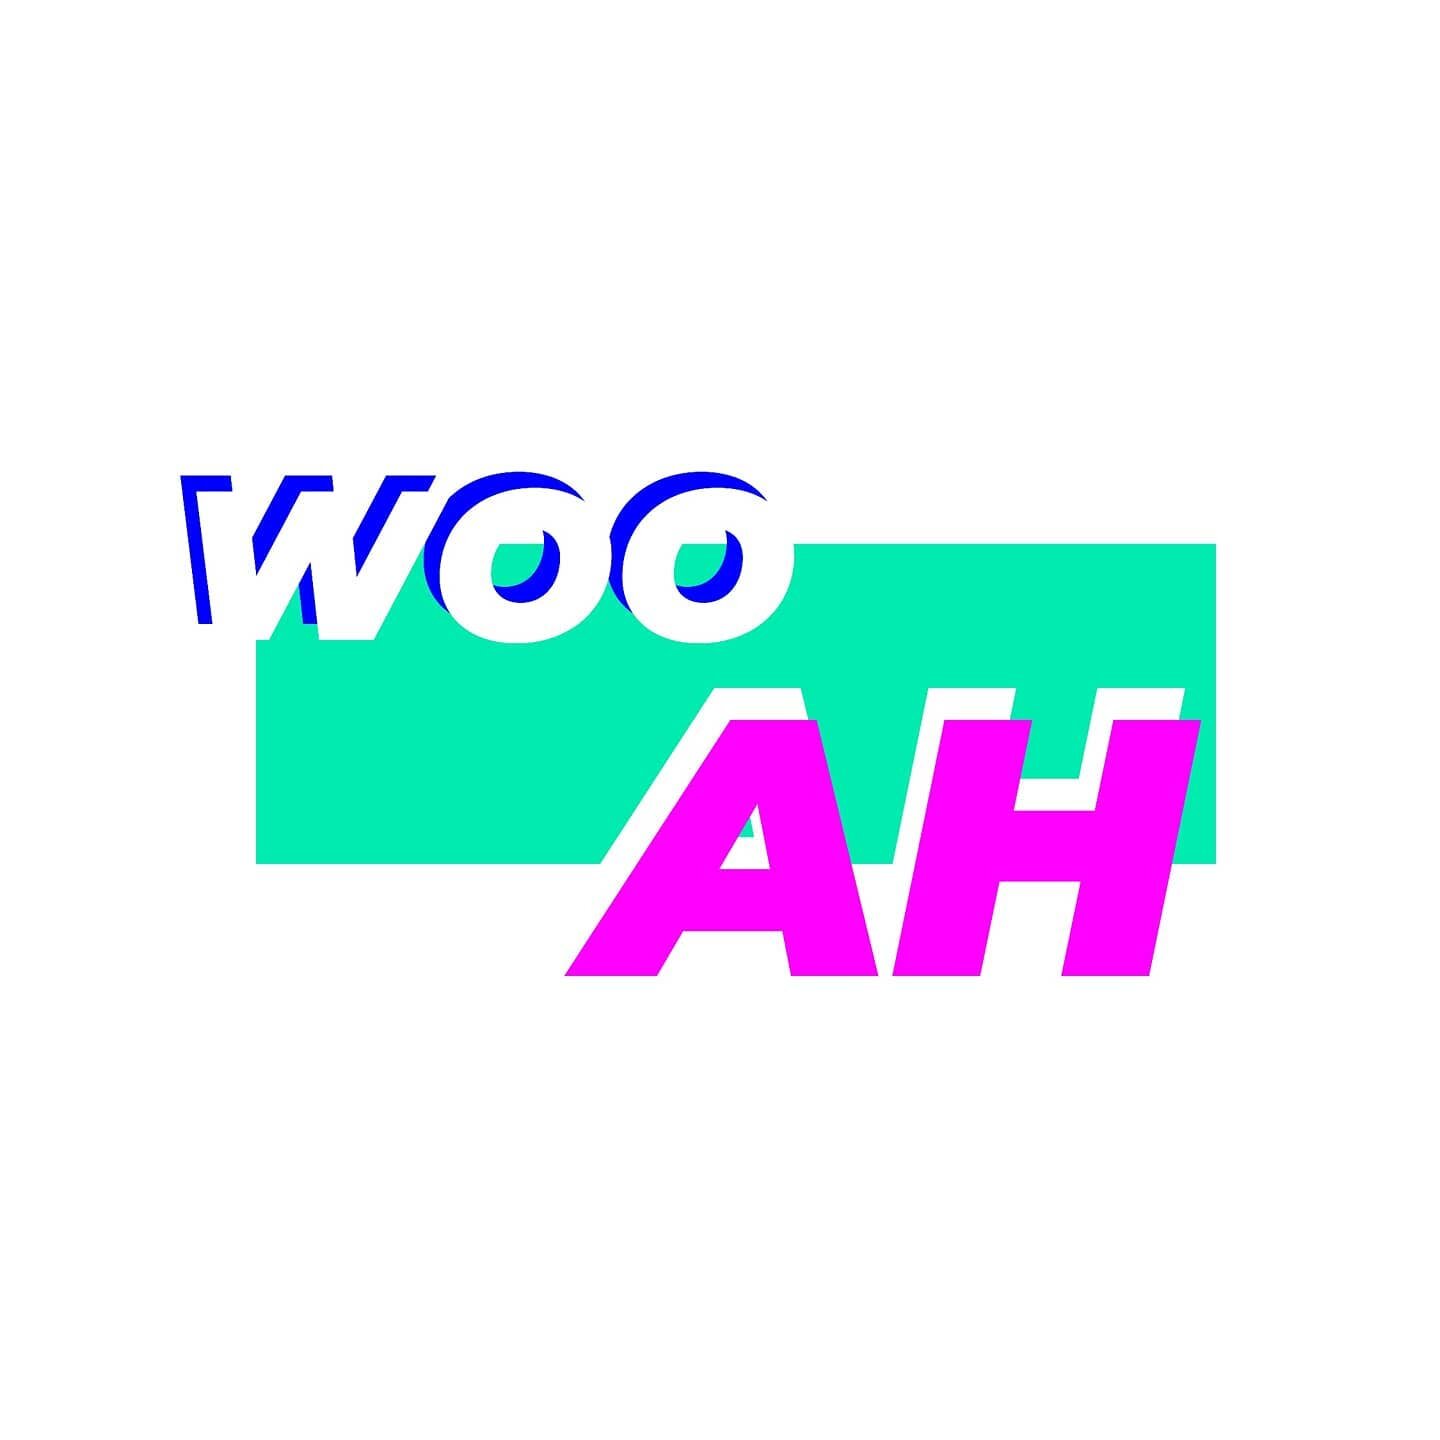 An in-progress project, Woo Ah aims to capture the vibrant, 90s-influenced styles of modern youth apparel
...
...
#design #logo # #graphicdesign #bright #designspiration #brands #americaneagle #supreme #90s #retroaesthetic
#retrostyle